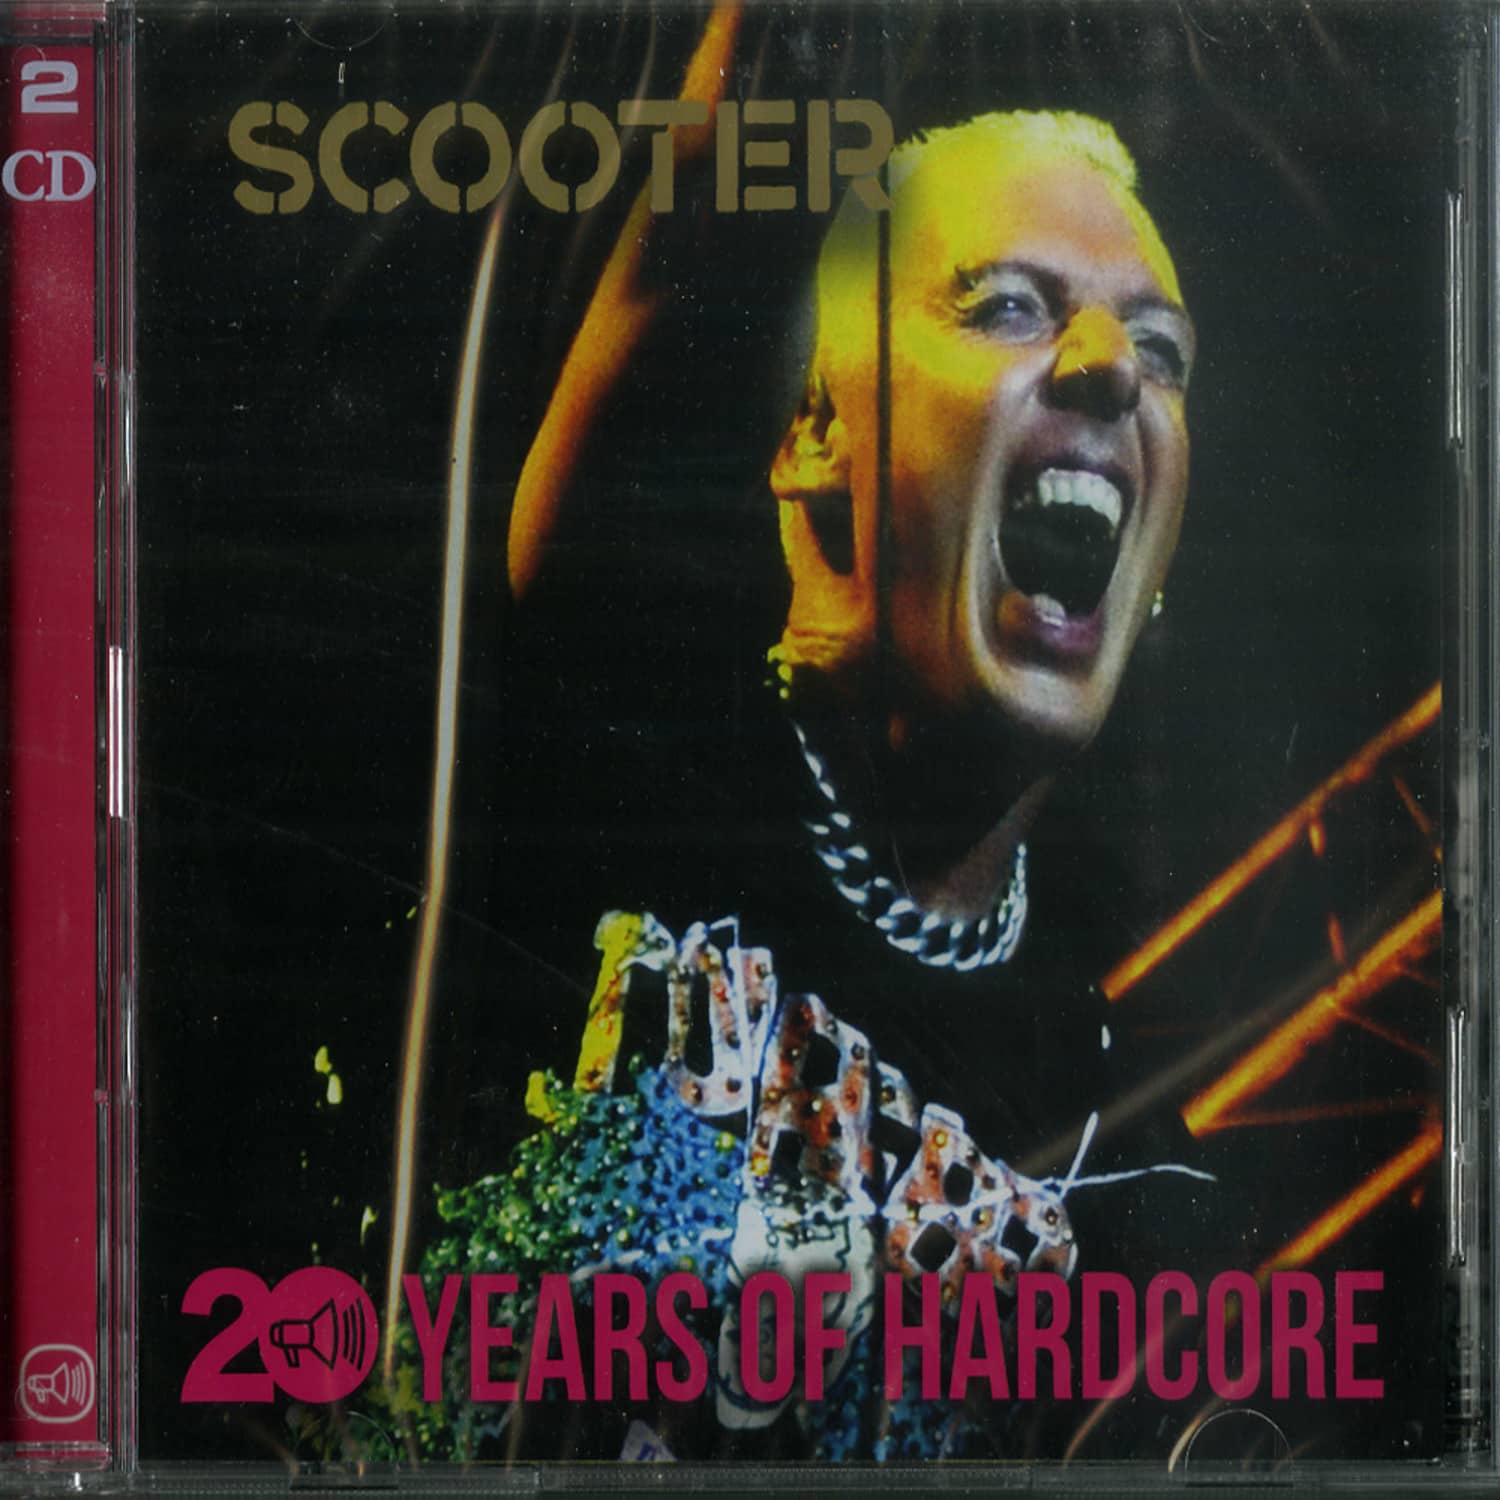 Scooter - 20 YEARS OF HARDCORE 